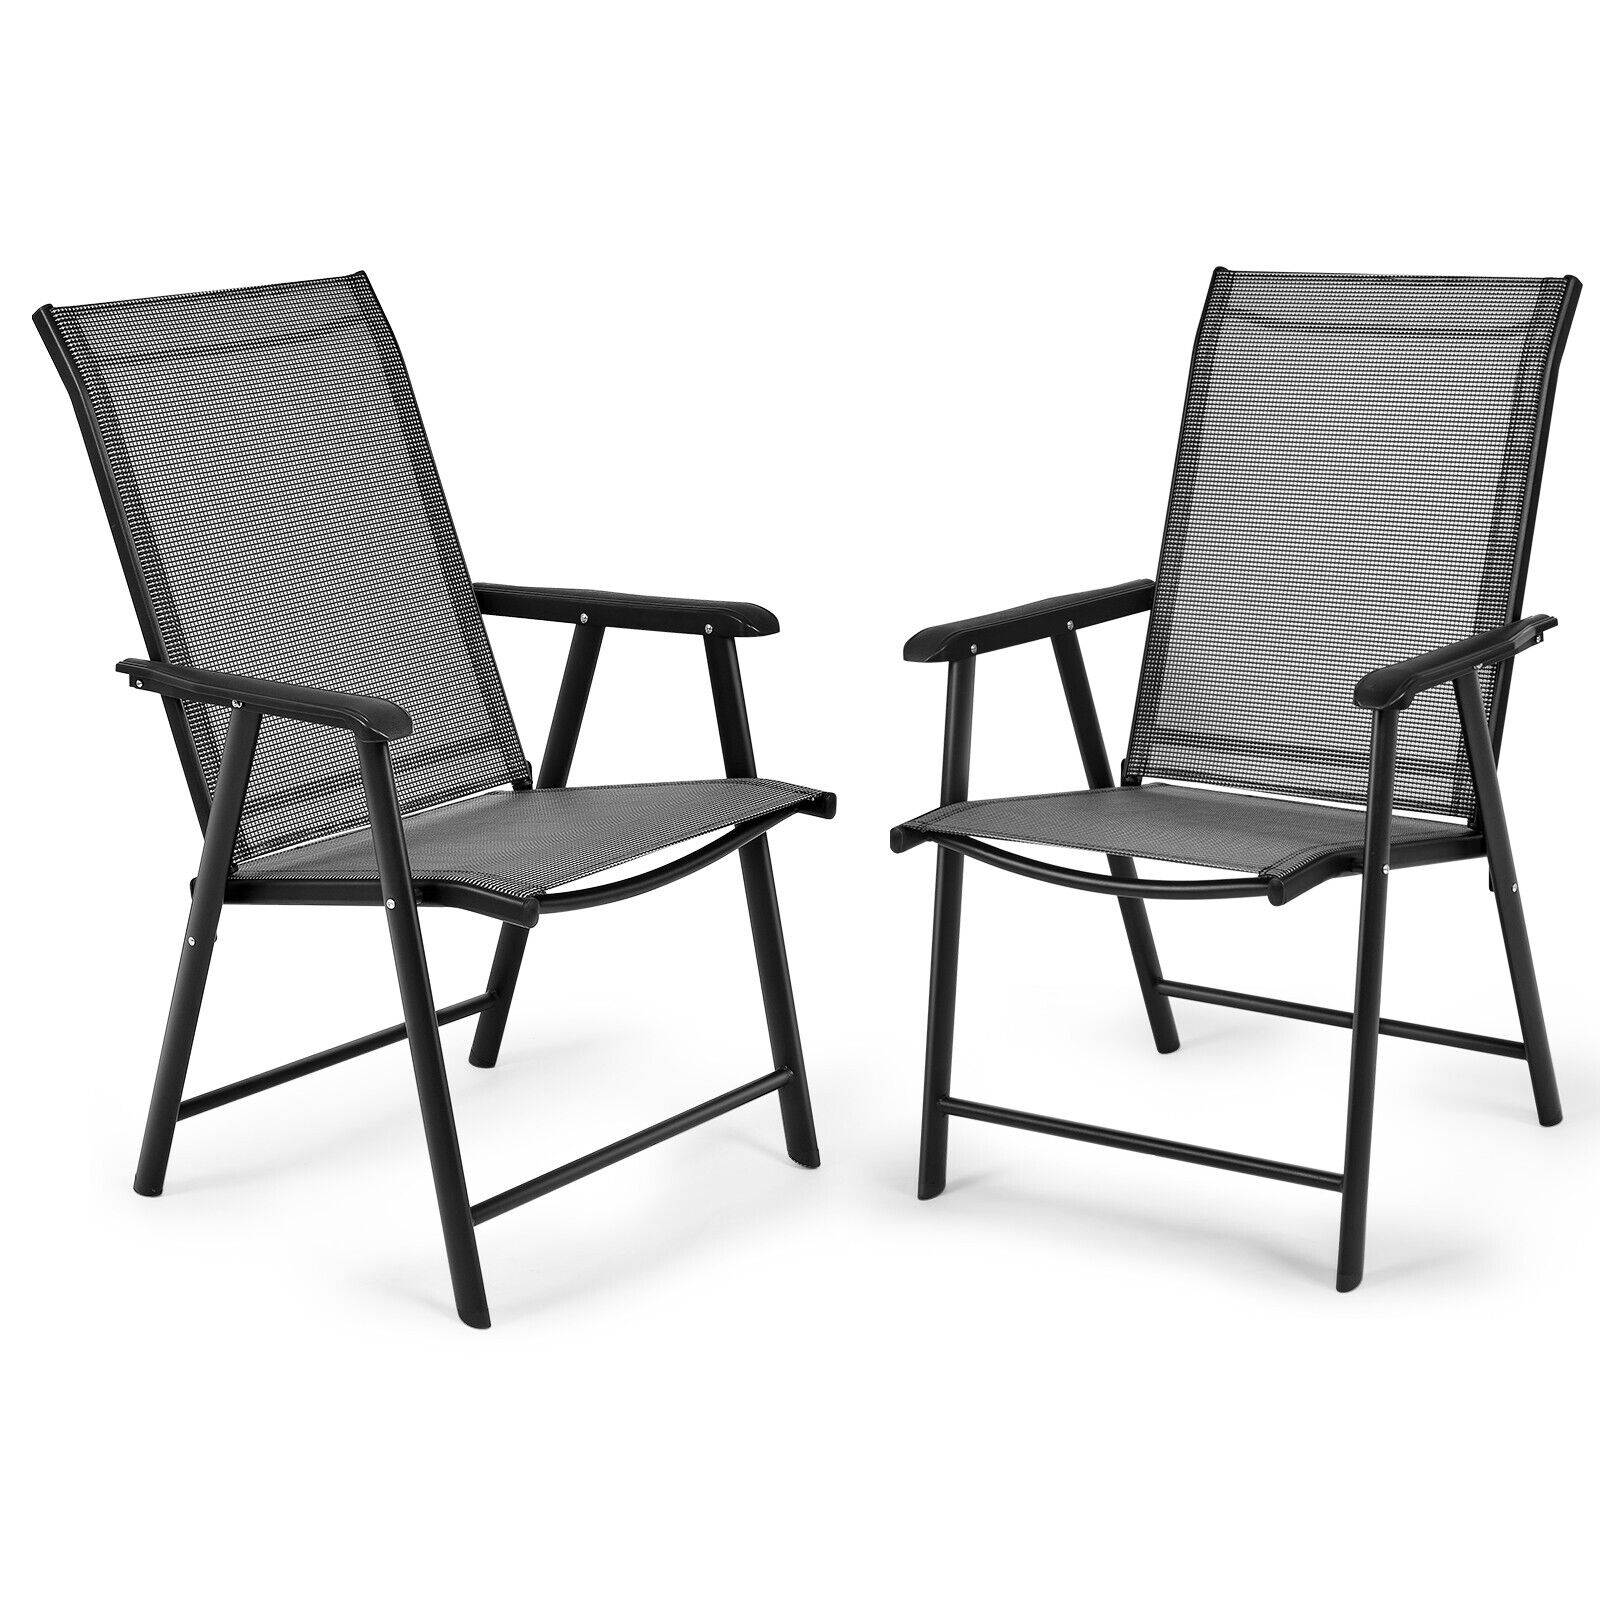 Set of 2 Folding Outdoor Dining Chairs with Ergonomic Armrests-Grey